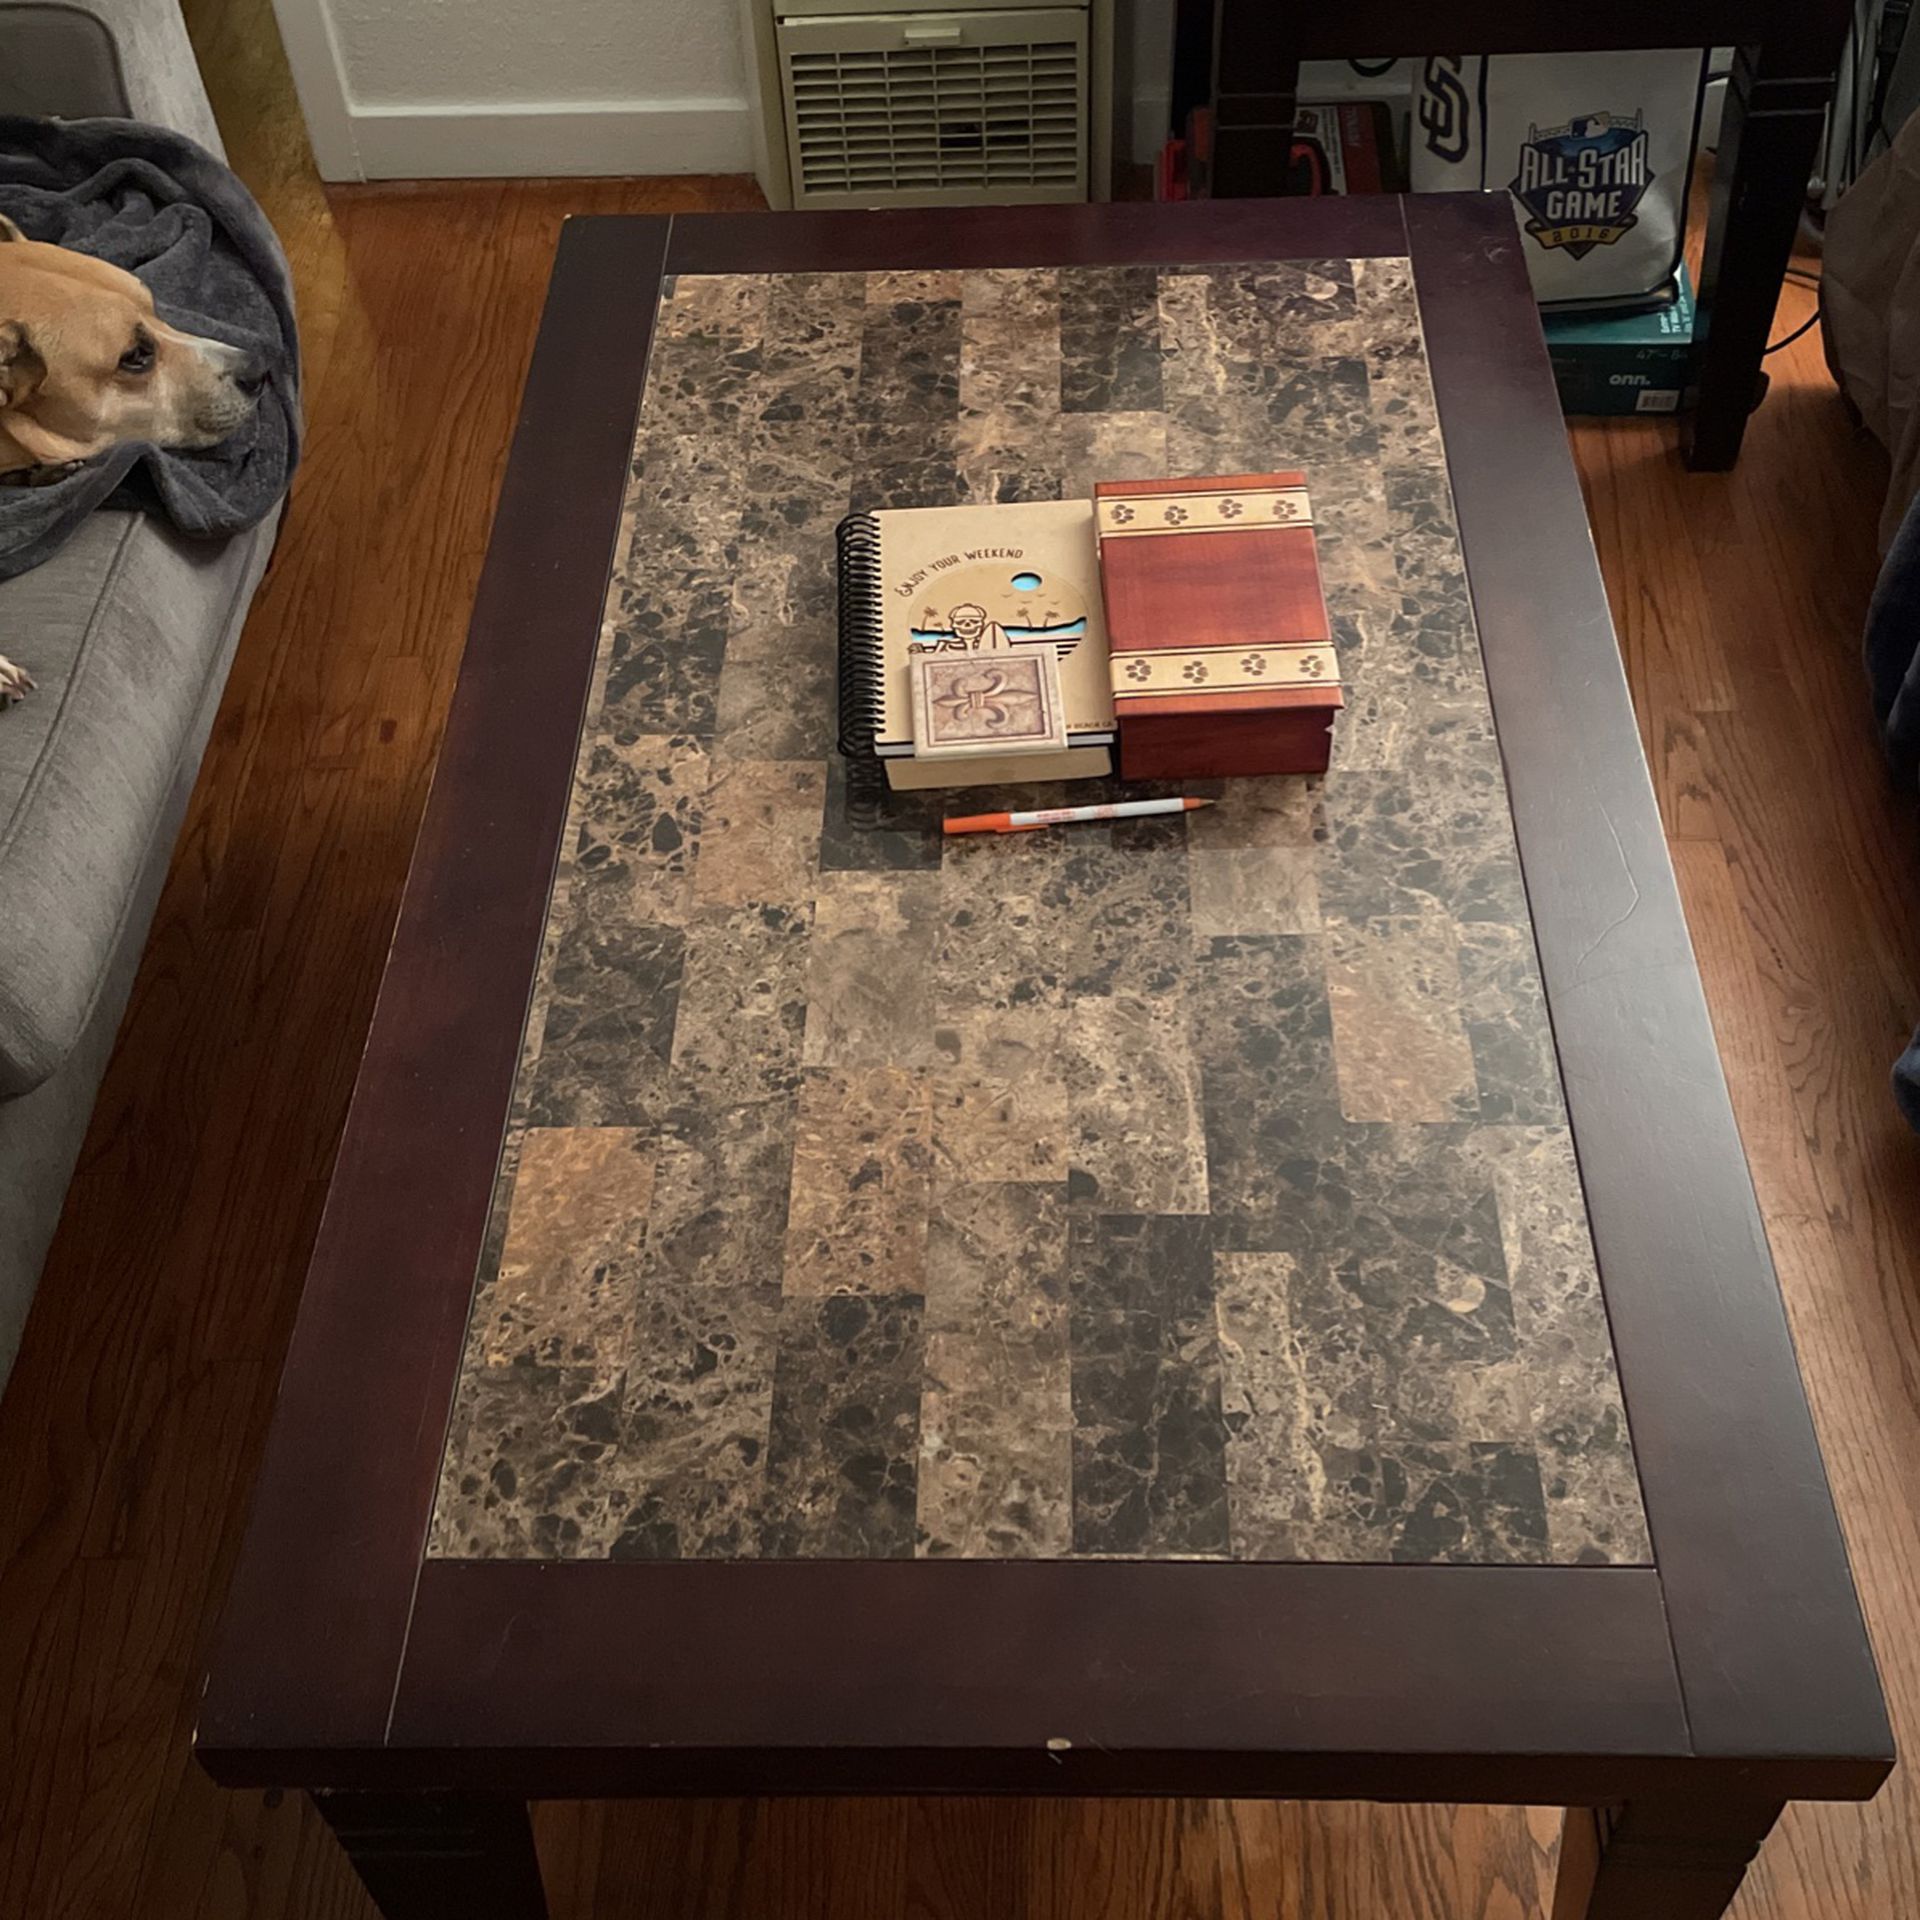 Coffee Table With Matching End Tables